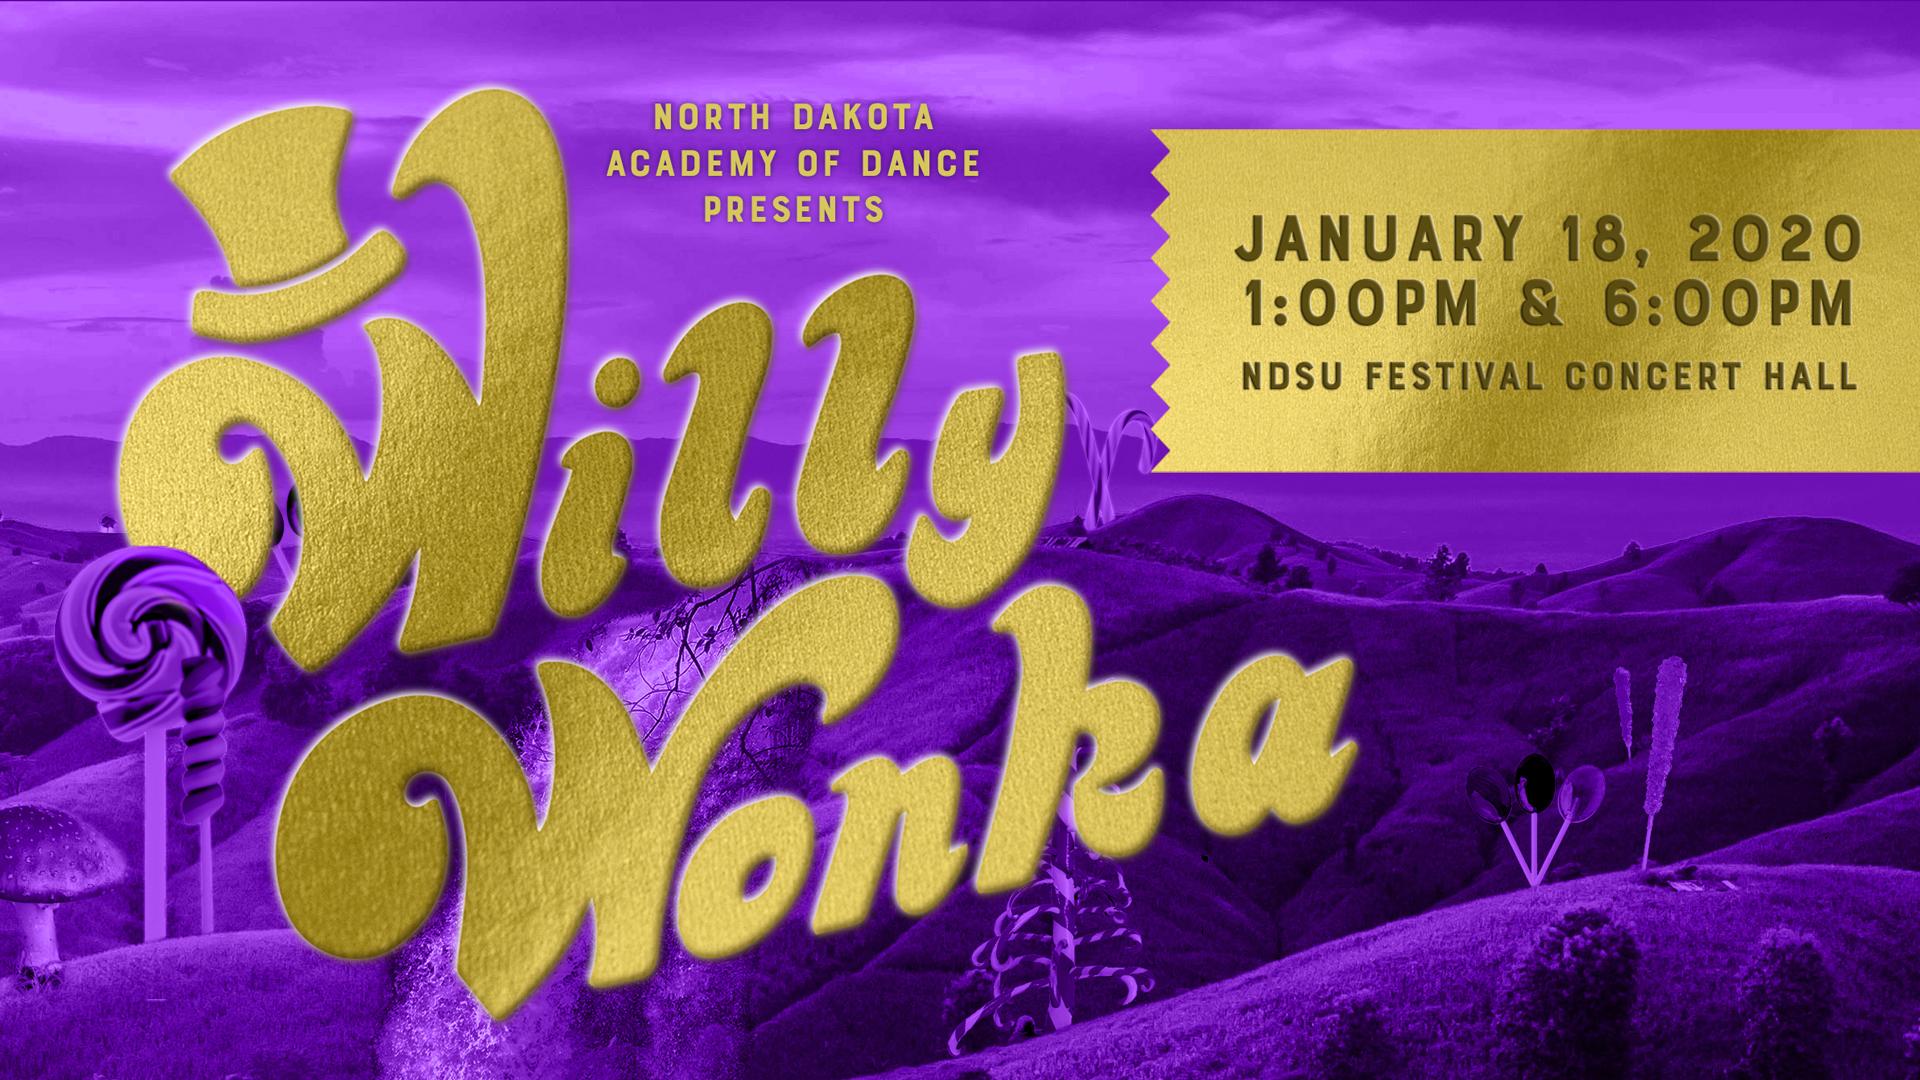 Willy Wonka and the Chocolate Factory - 6:00PM SHOW